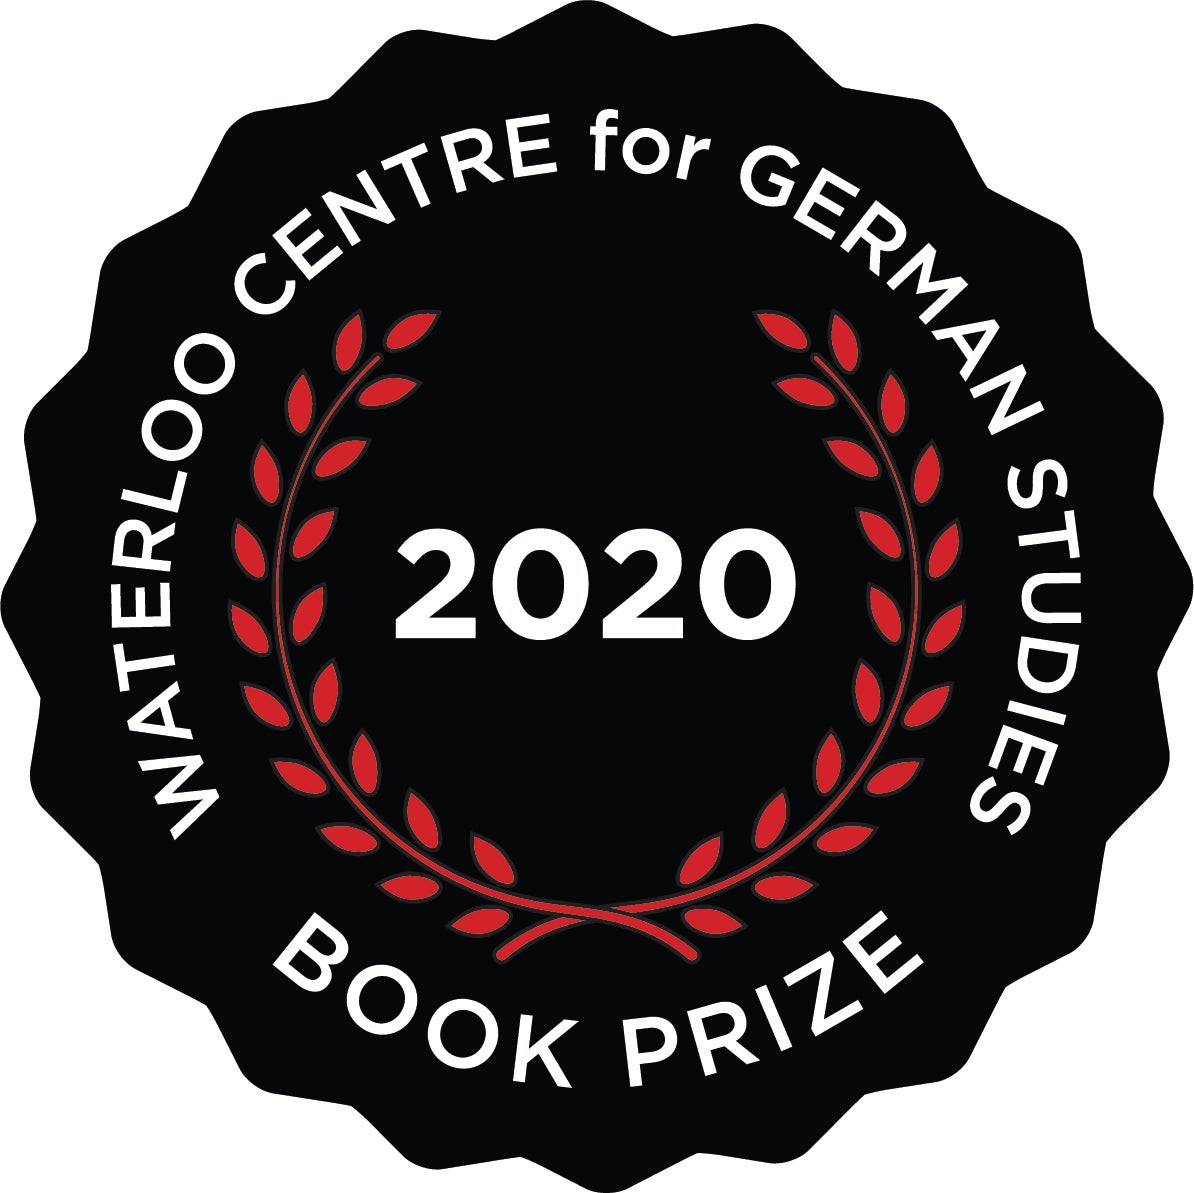 Seal of WCGS Book Prize 2020